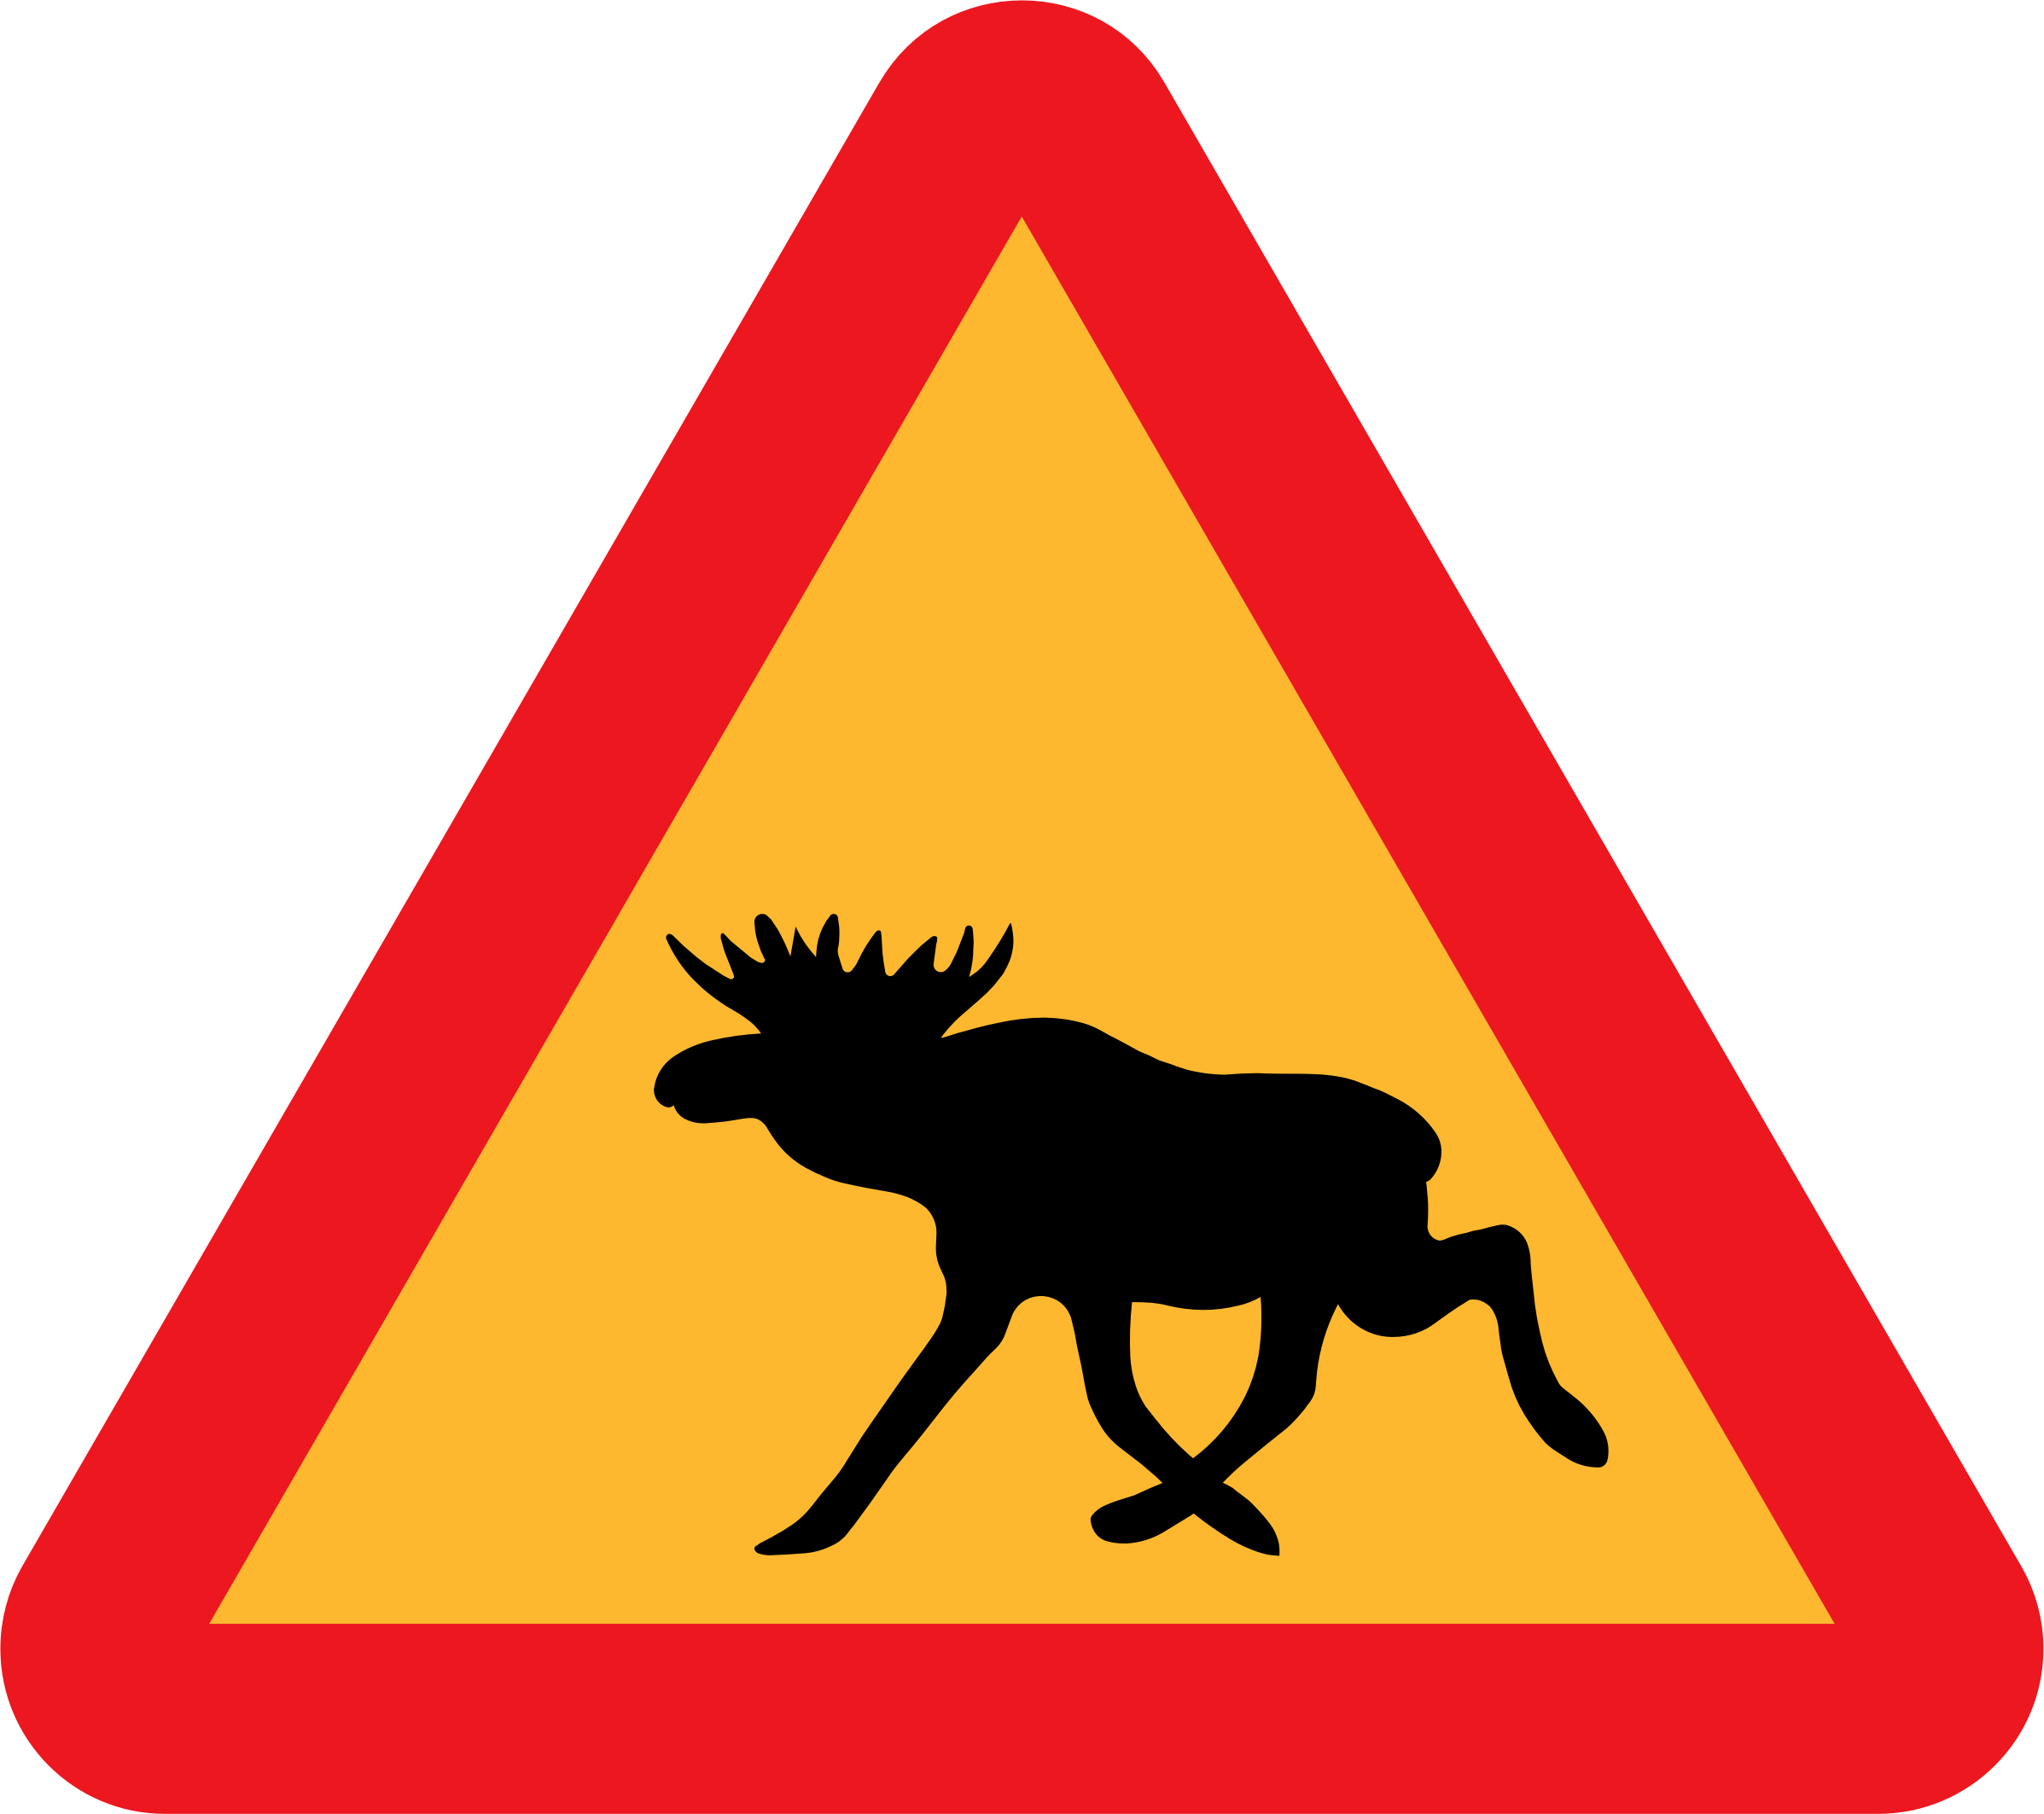 moose clipart red